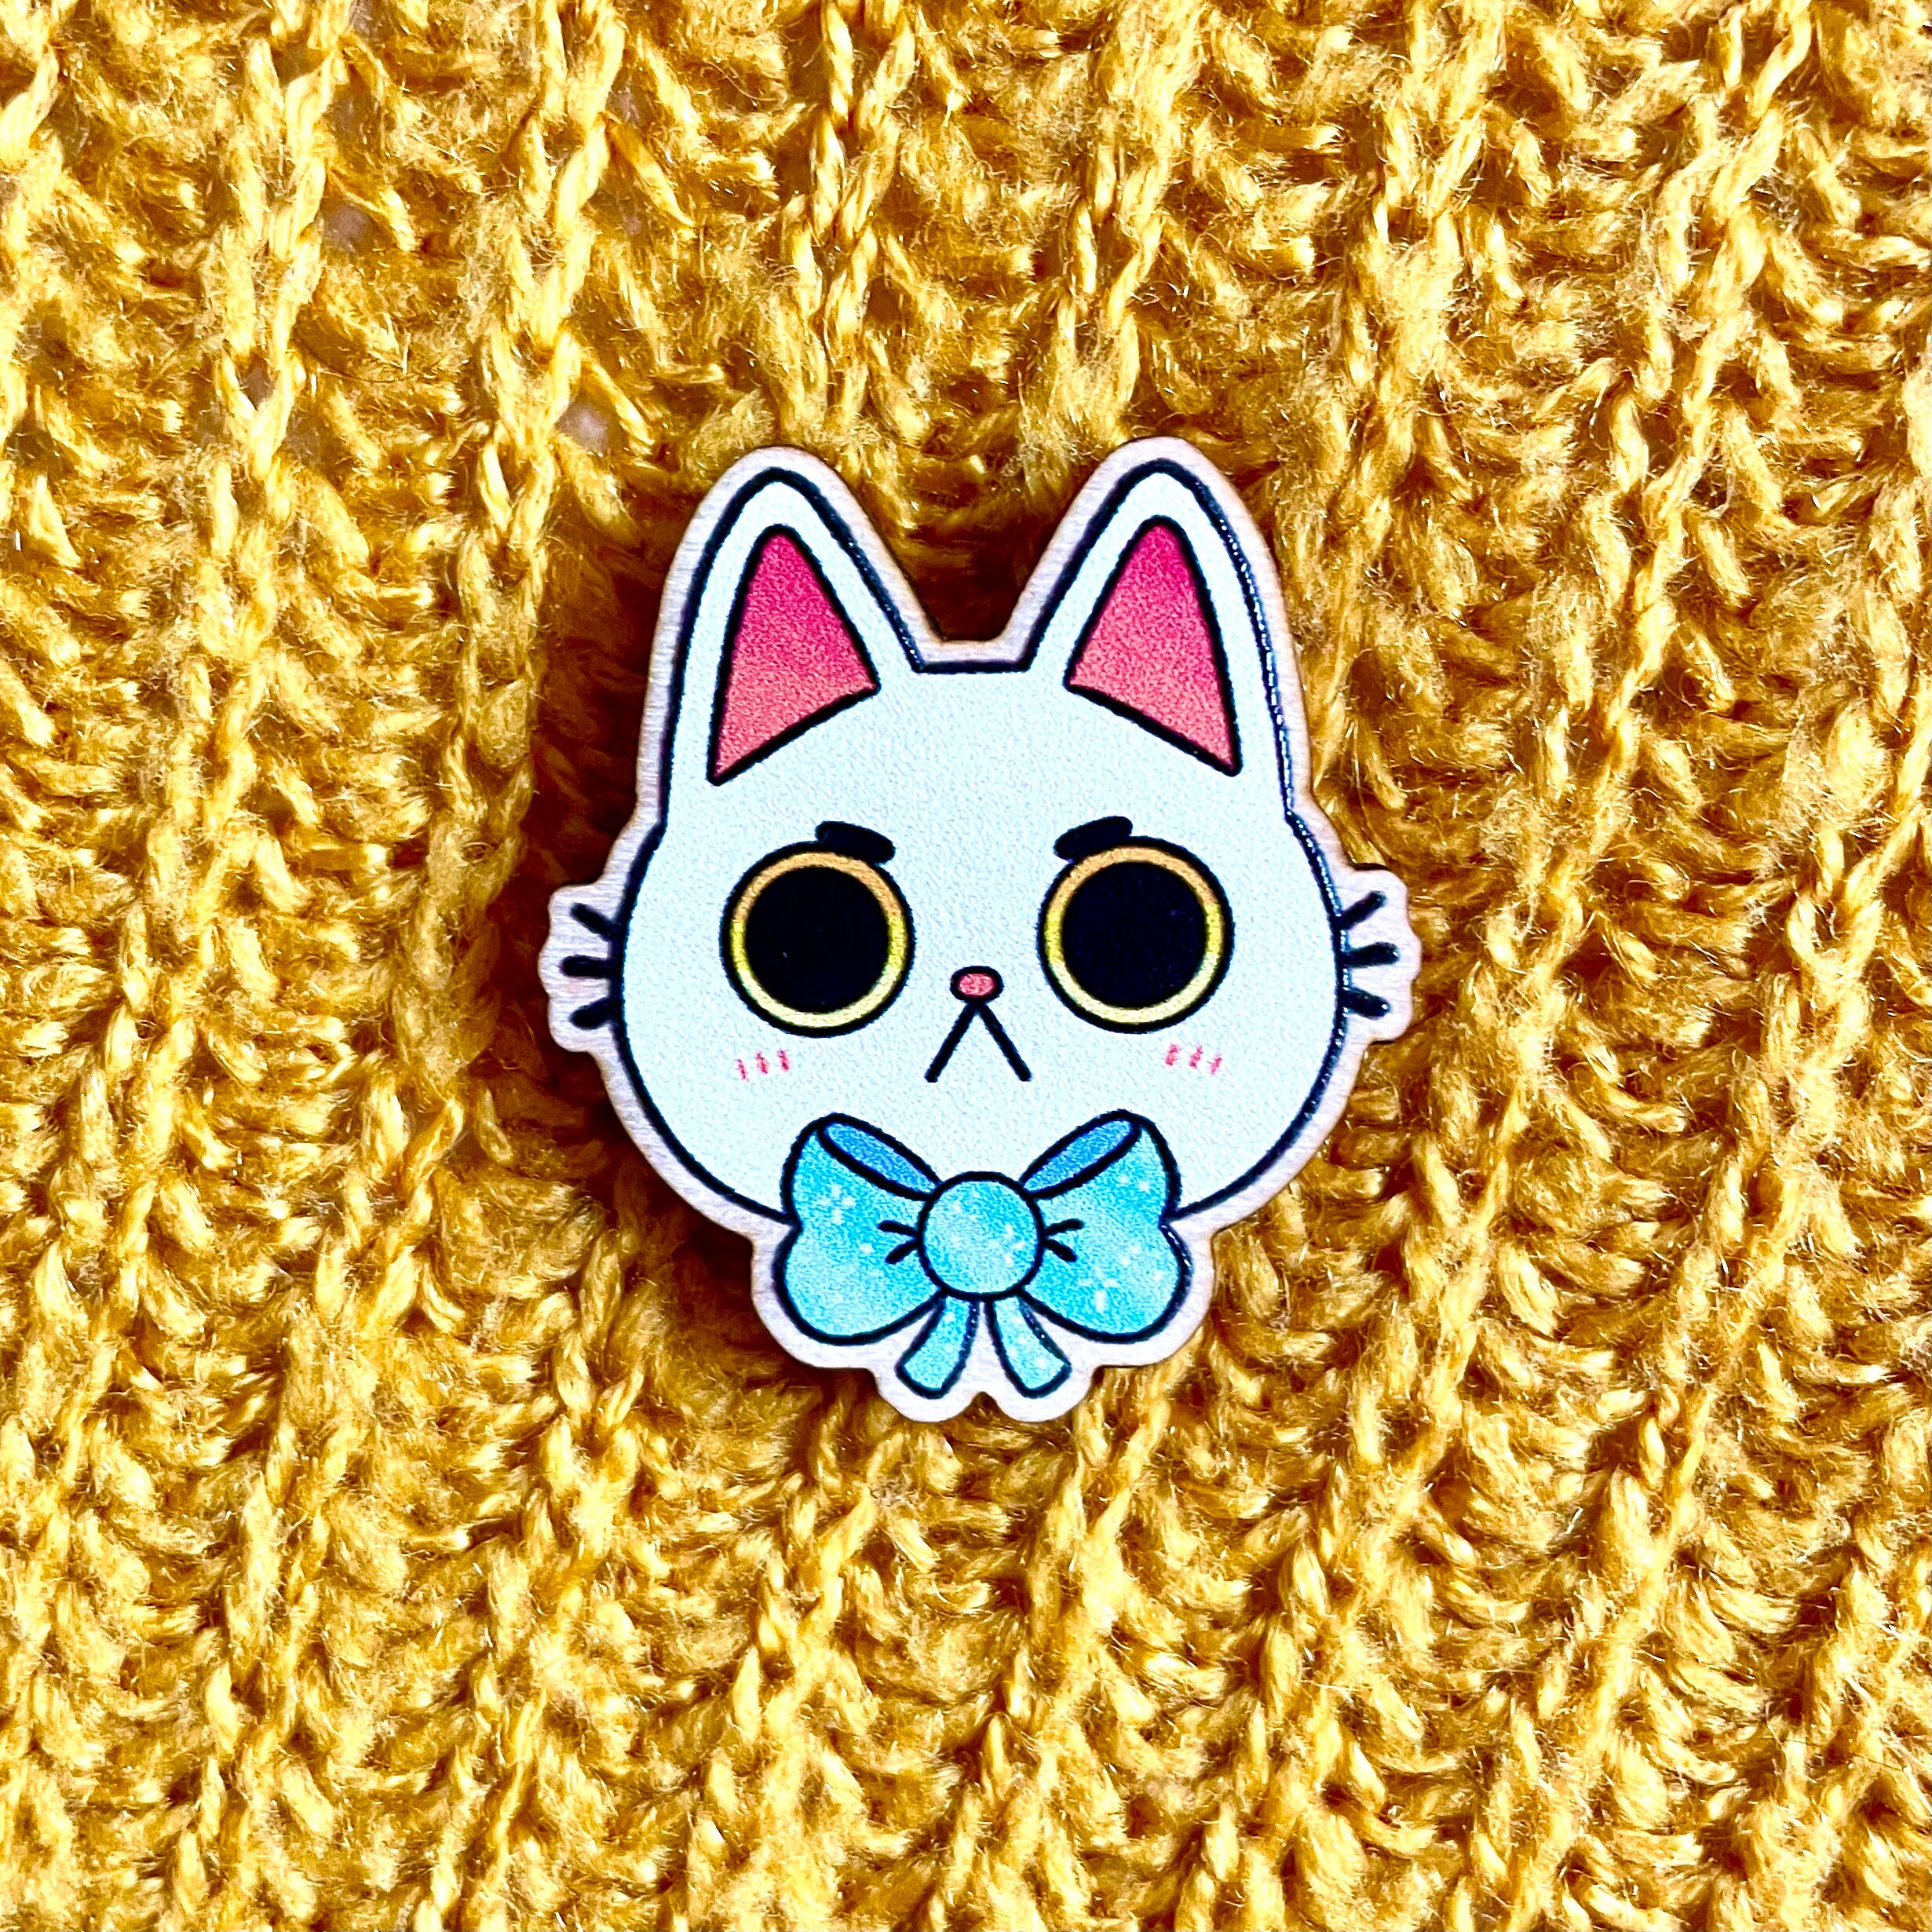 Moody Cat Pins Cute Wooden Multicolour Cat Badges Black White Tuxedo Calico  Tortoise Shell Tabby Persian Ragdoll Siamese Ginger Cats -  UK